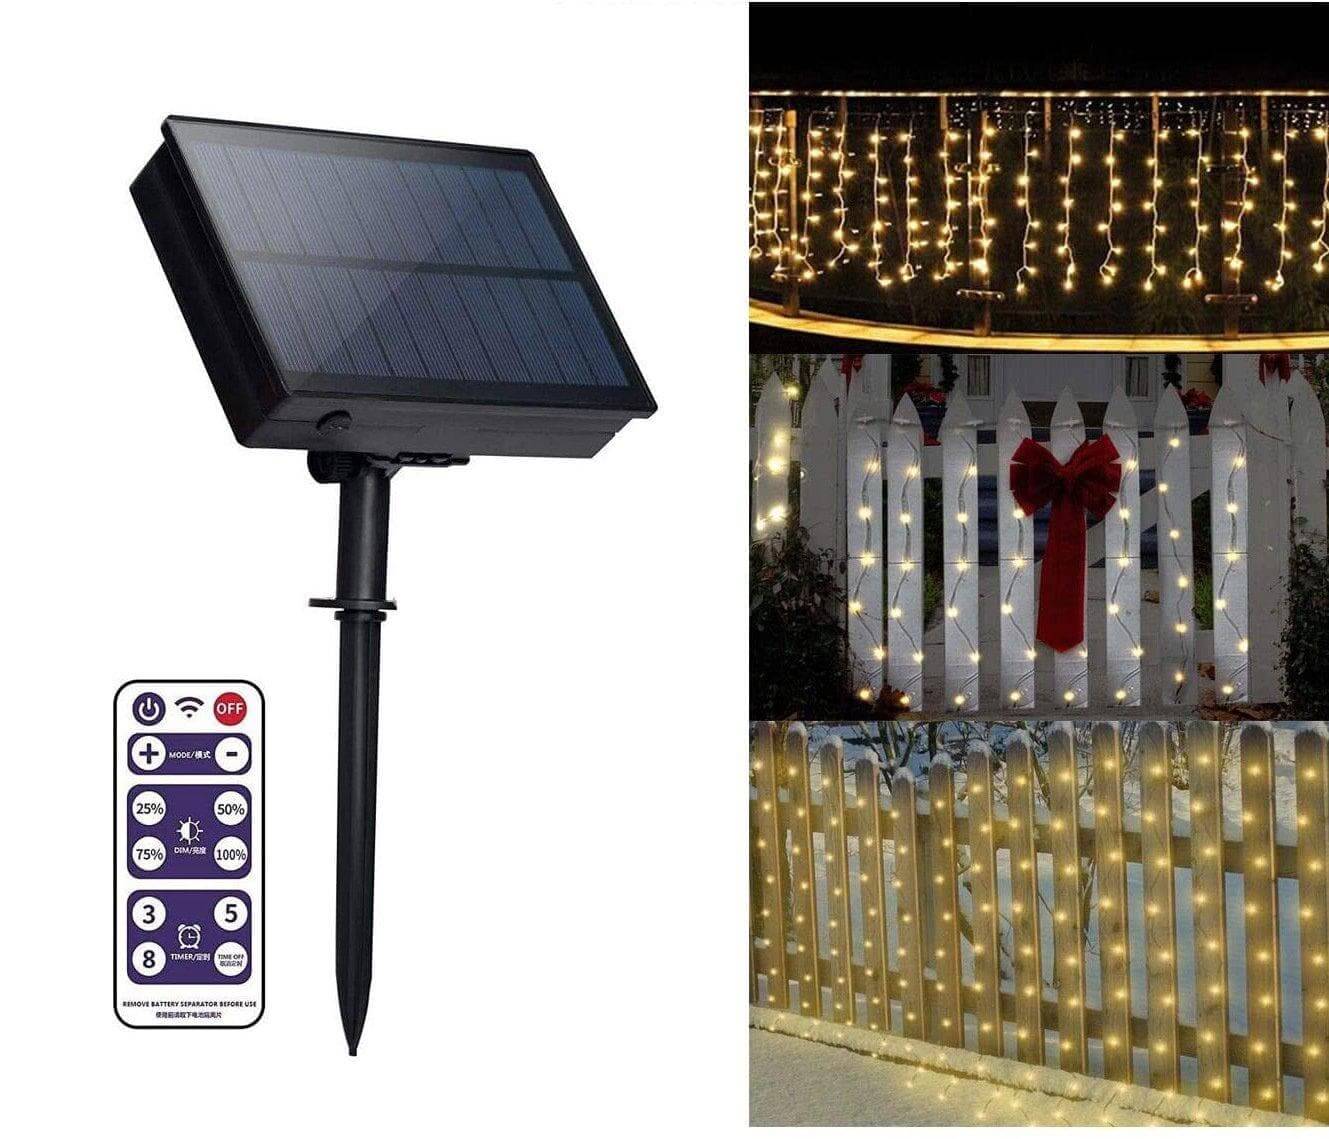 Premium Warm White LED Solar Icicle lights with Remote